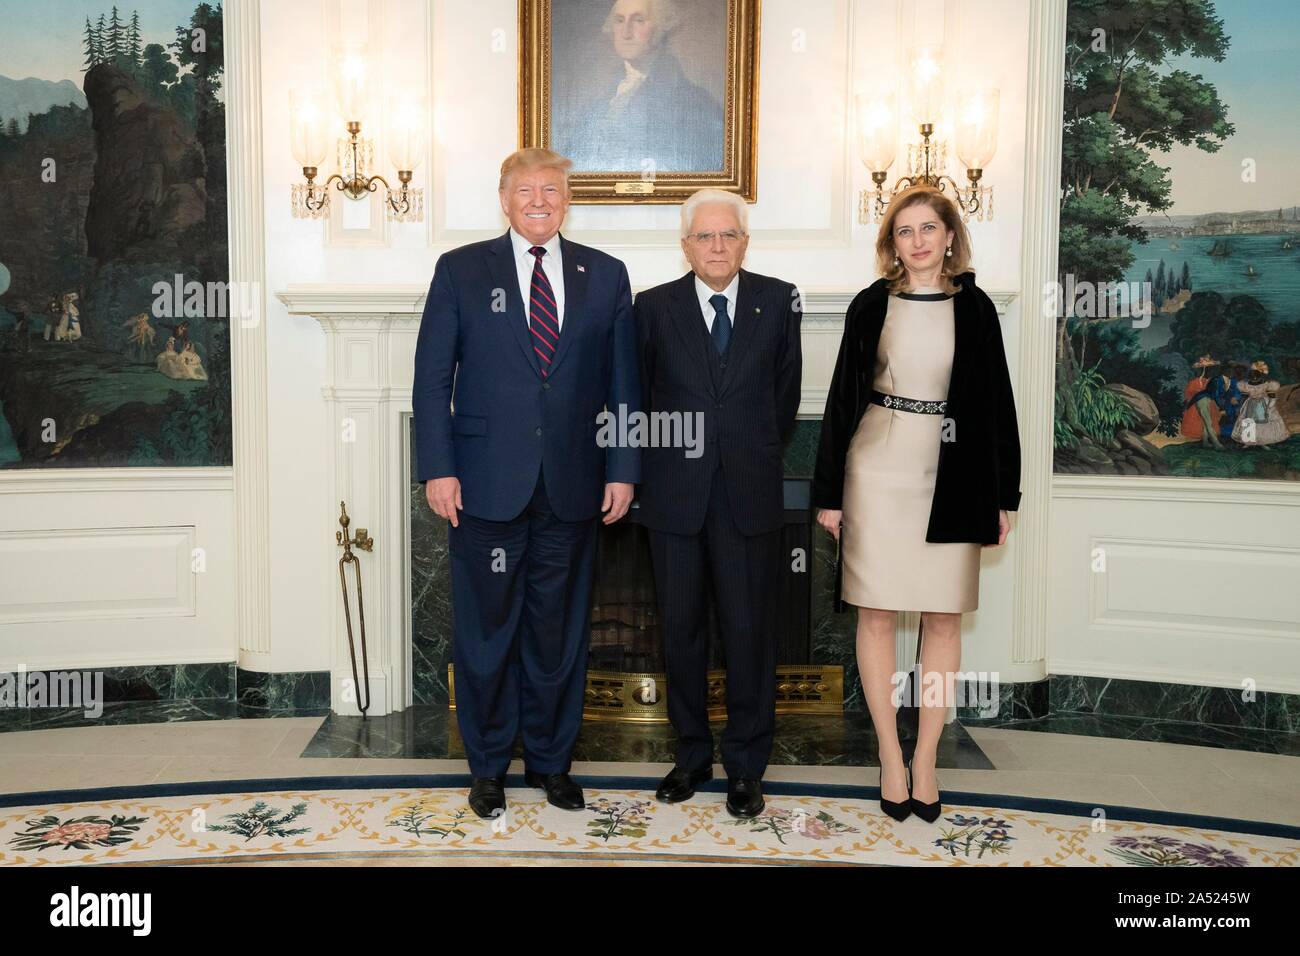 Washington, United States of America. 16 October, 2019. U.S President Donald Trump, left, poses with Italian President Sergio Mattarella, center, and and his daughter Laura Mattarella in the Diplomatic Reception Room of the White House October 16, 2019 in Washington, DC. Credit: Tia Dufour/White House Photo/Alamy Live News Stock Photo